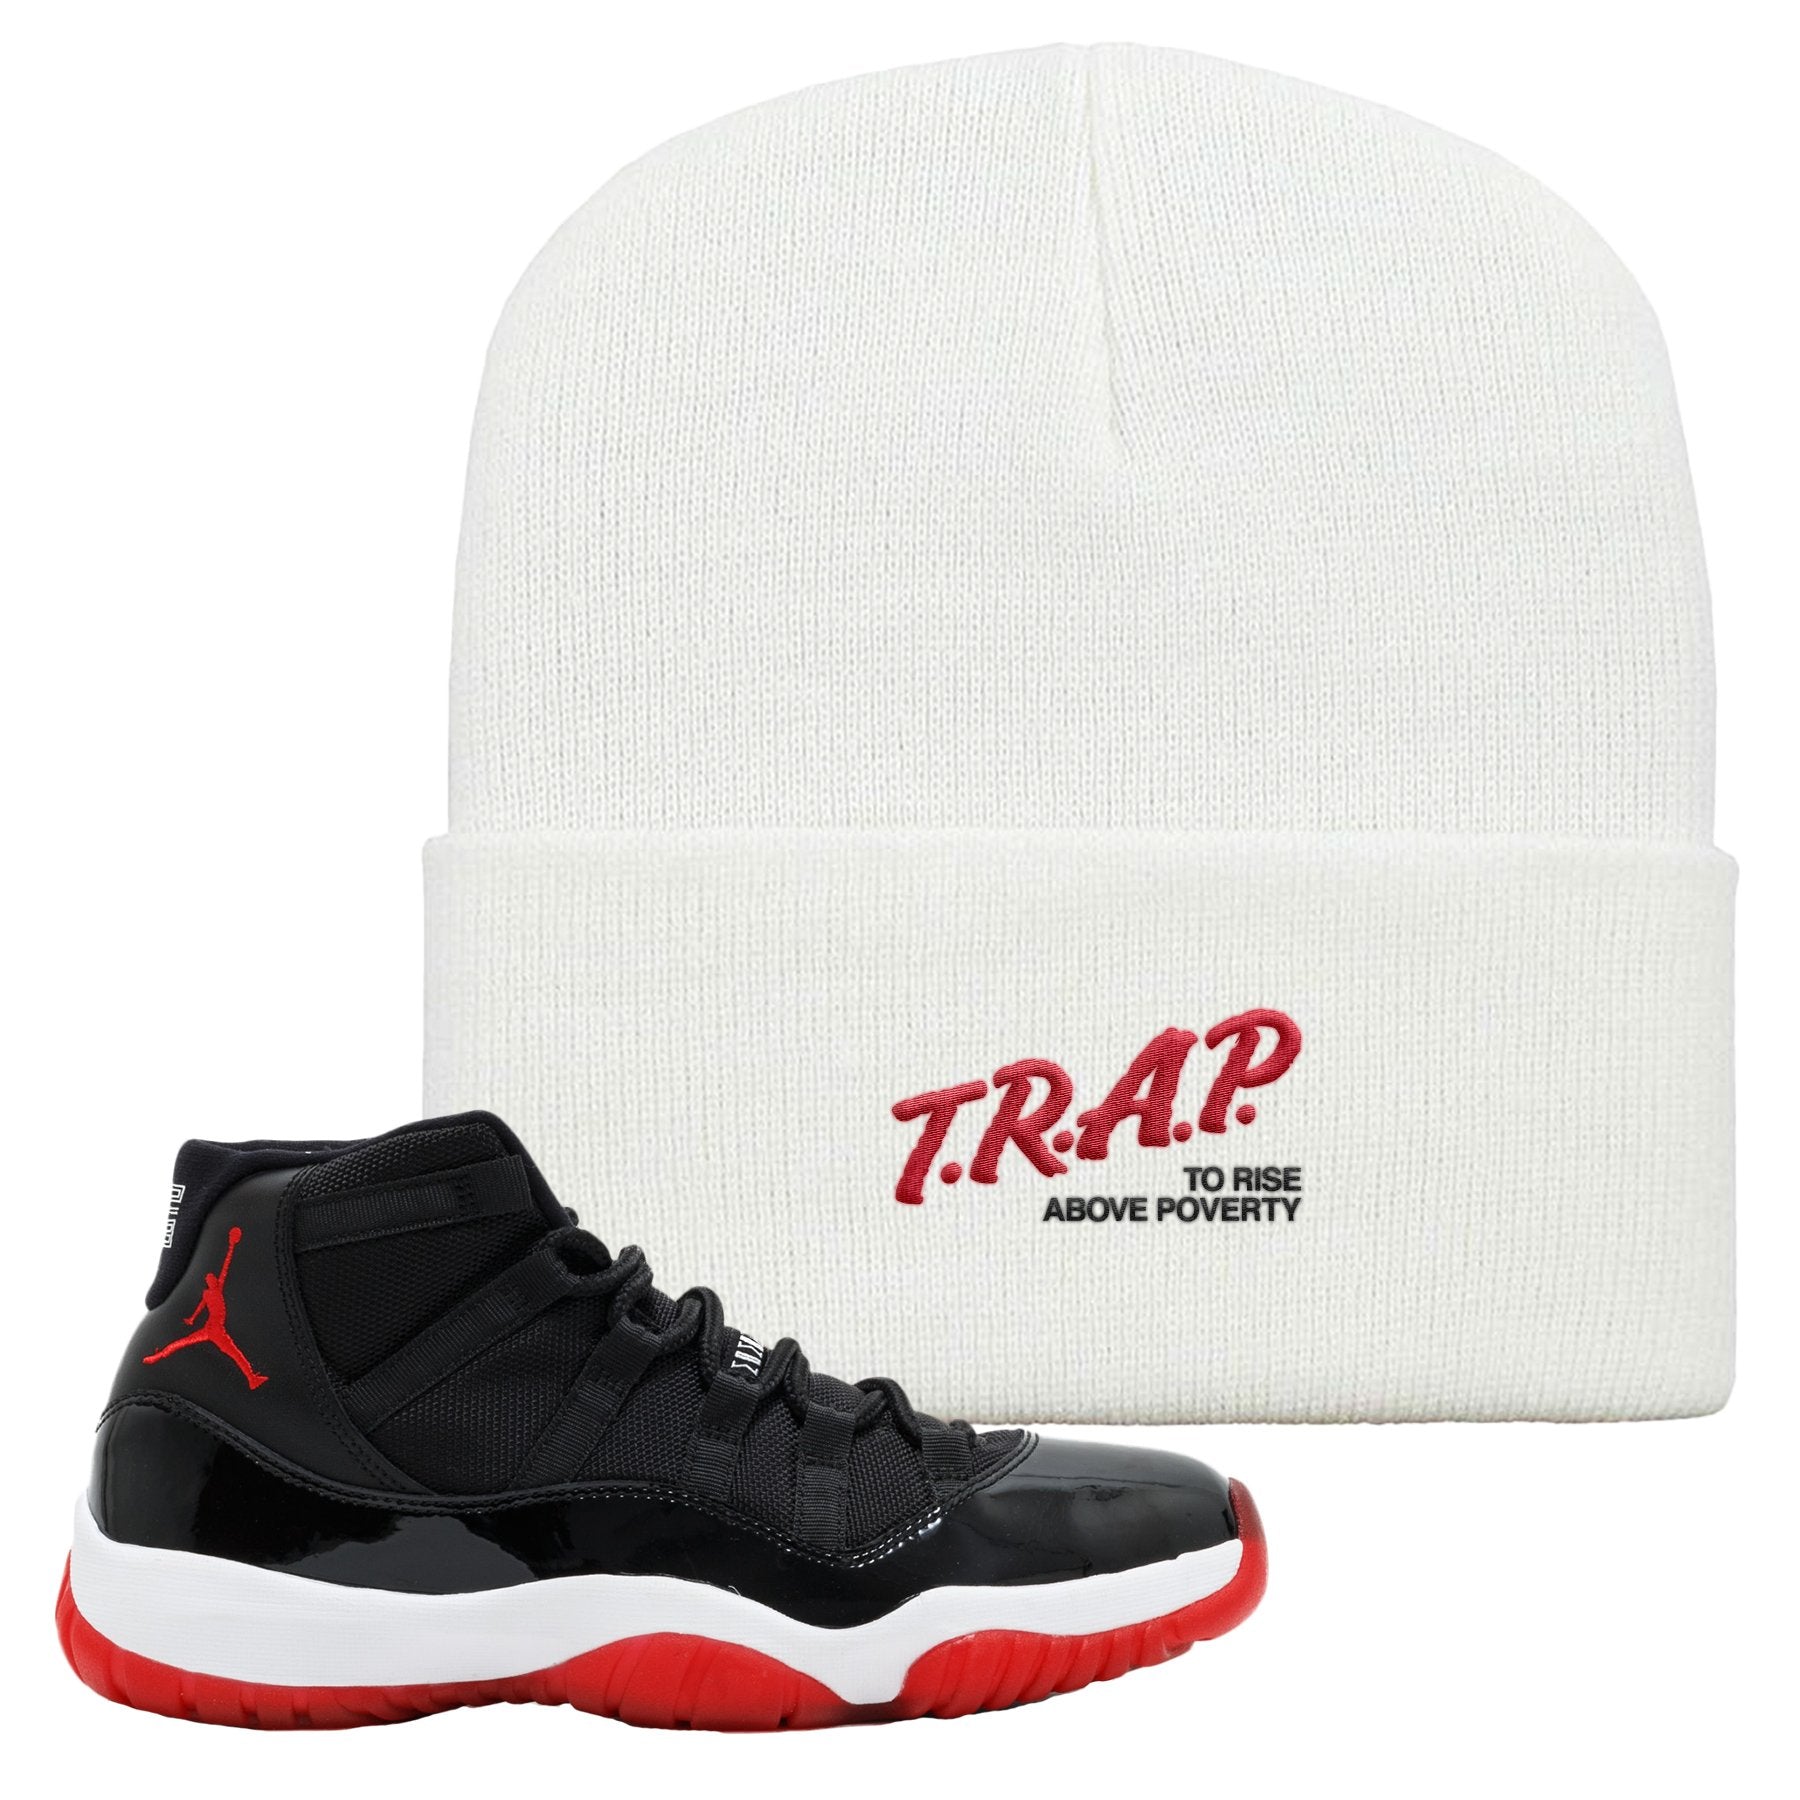 Jordan 11 Bred Trap To Rise Above Poverty White Sneaker Hook Up Beanie